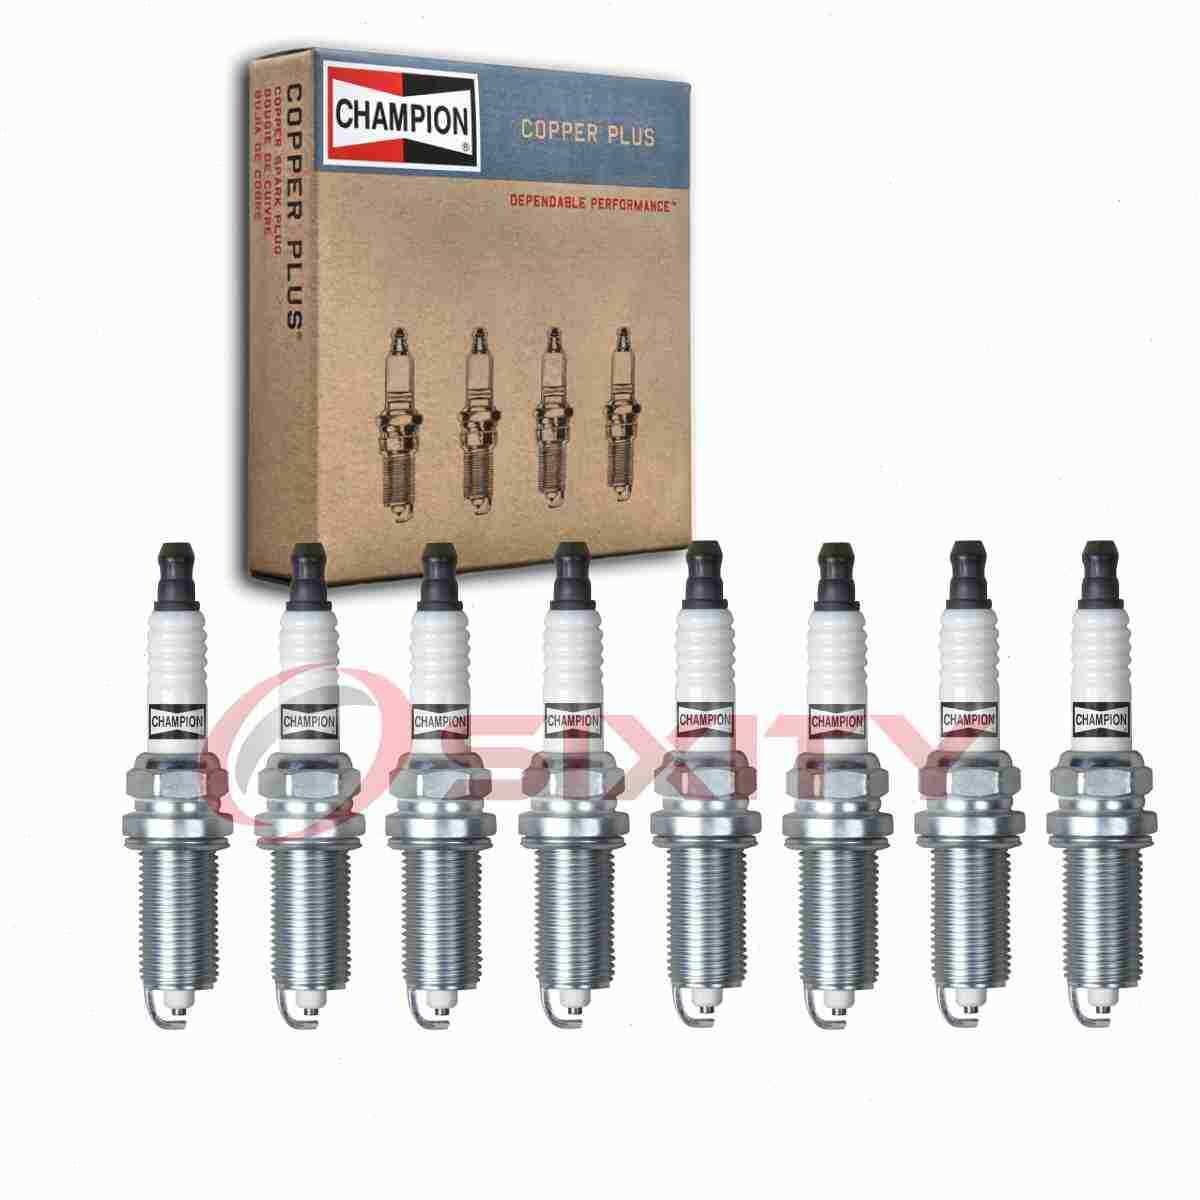 8 pc Champion Intake Side Copper Plus Spark Plugs for 2008-2009 Dodge wt